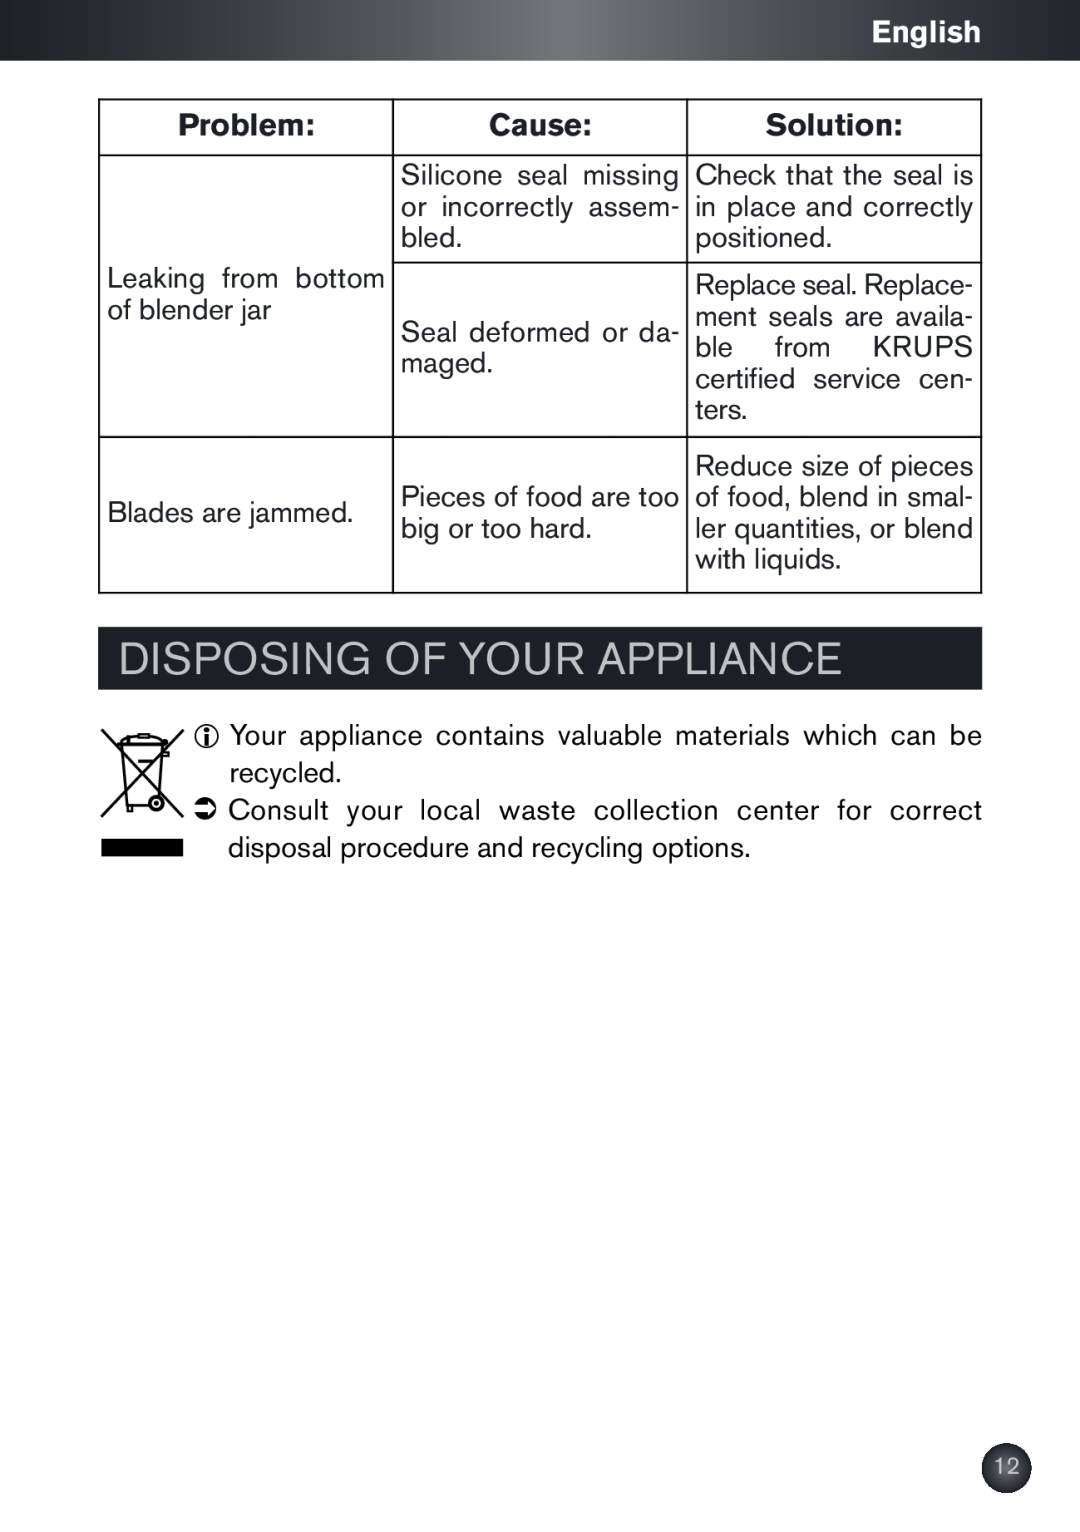 Krups KB790 manual Disposing Of Your Appliance, English, Problem, Cause, Solution 